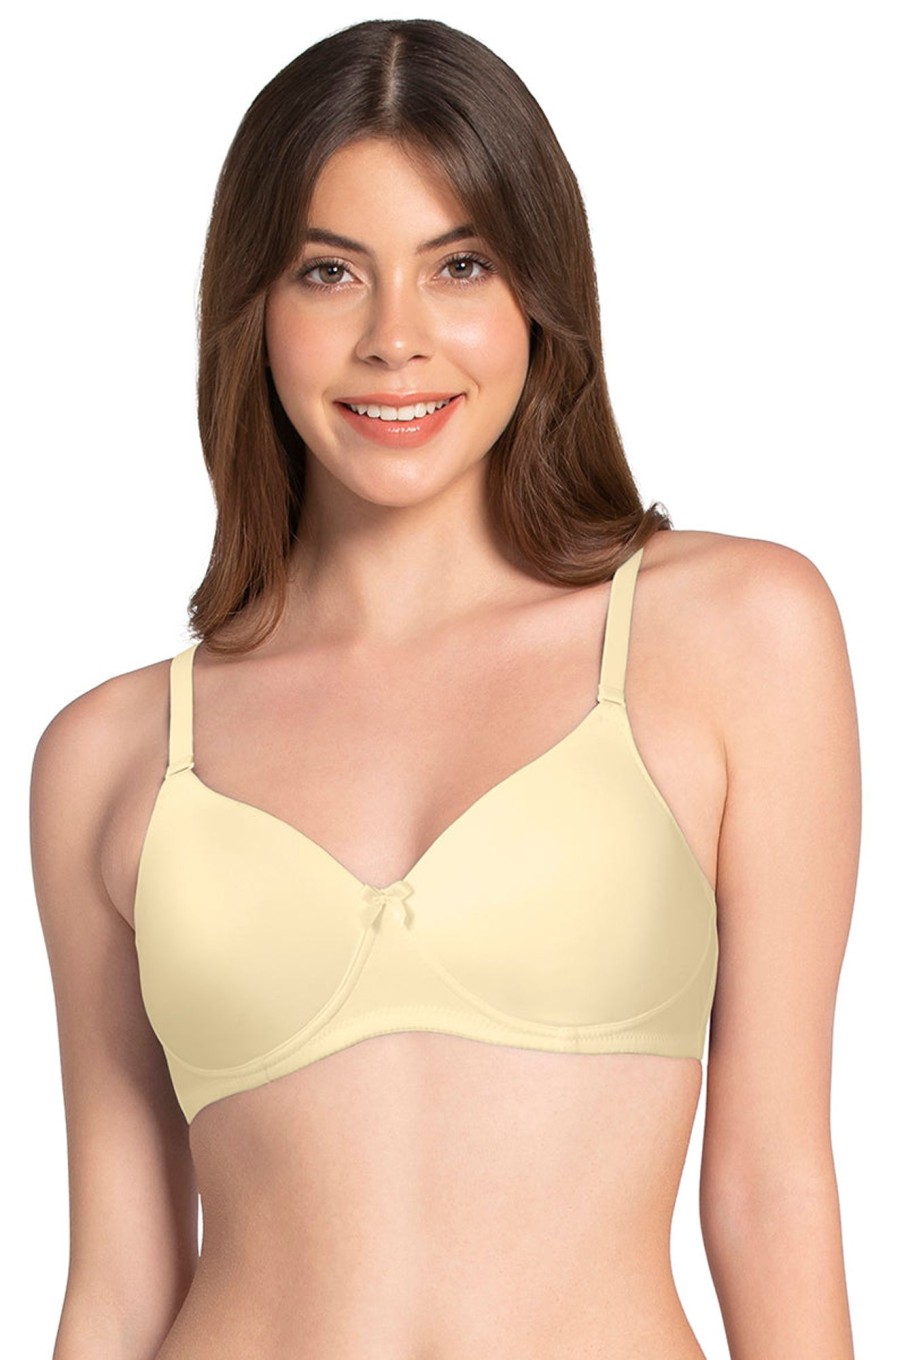 Bras Amante Cotton Casuals Padded Non-Wired Printed T-Shirt Bra